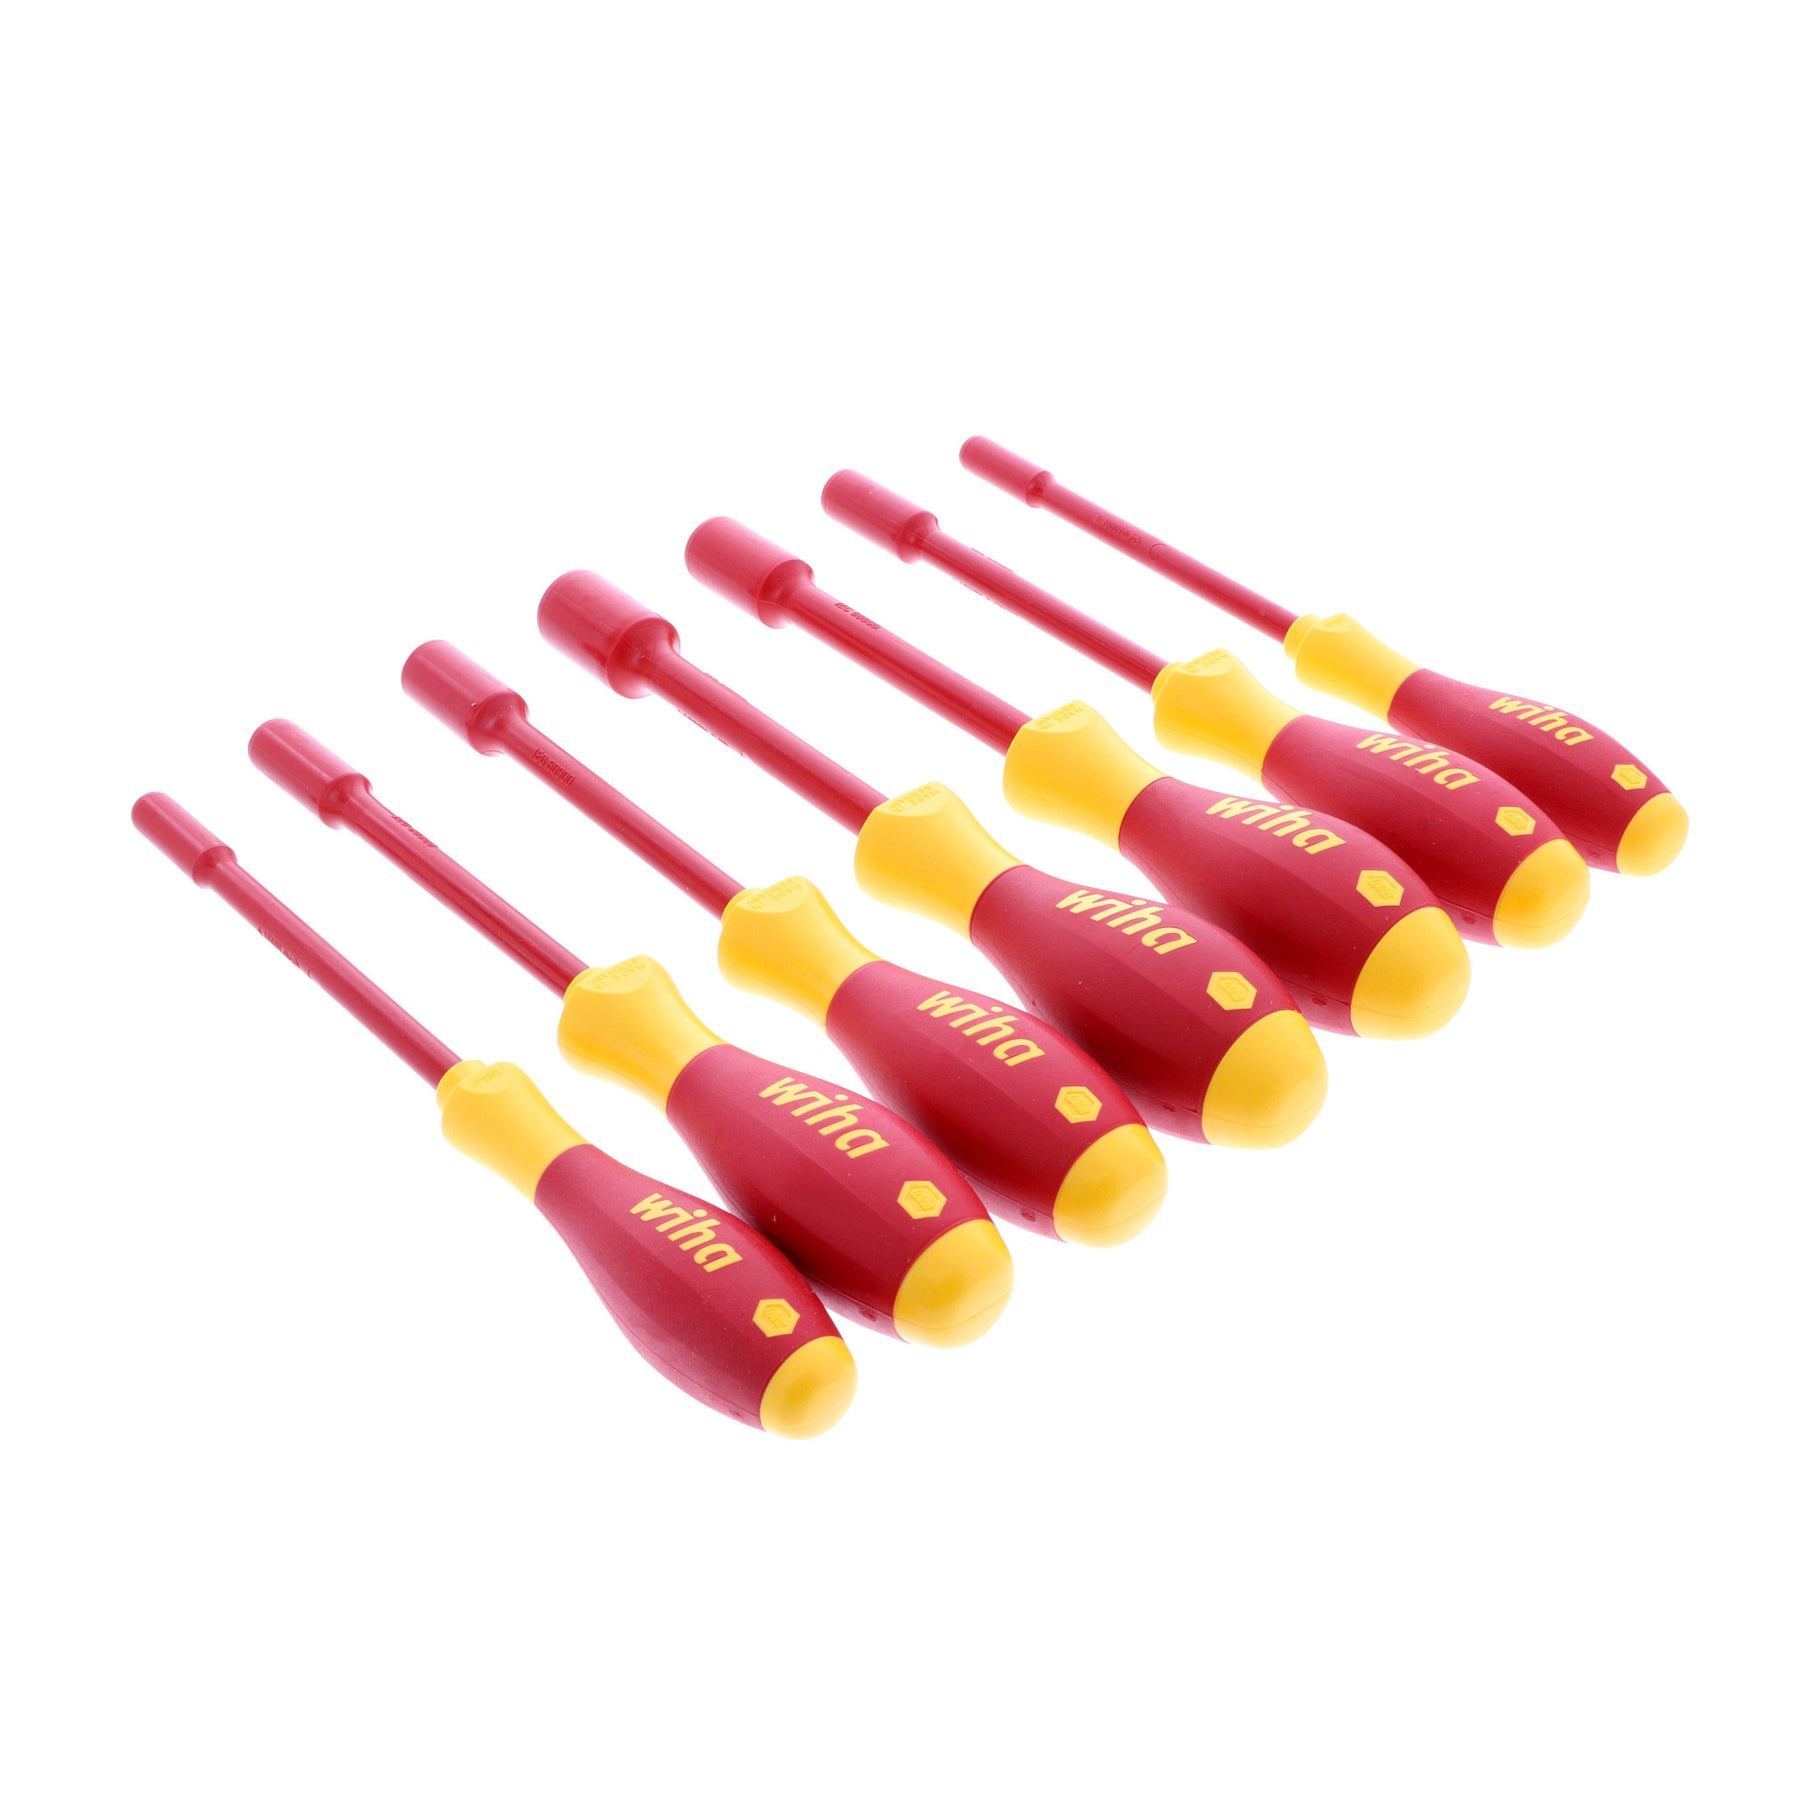 7 Piece Insulated SoftFinish Nut Driver Set - Inch